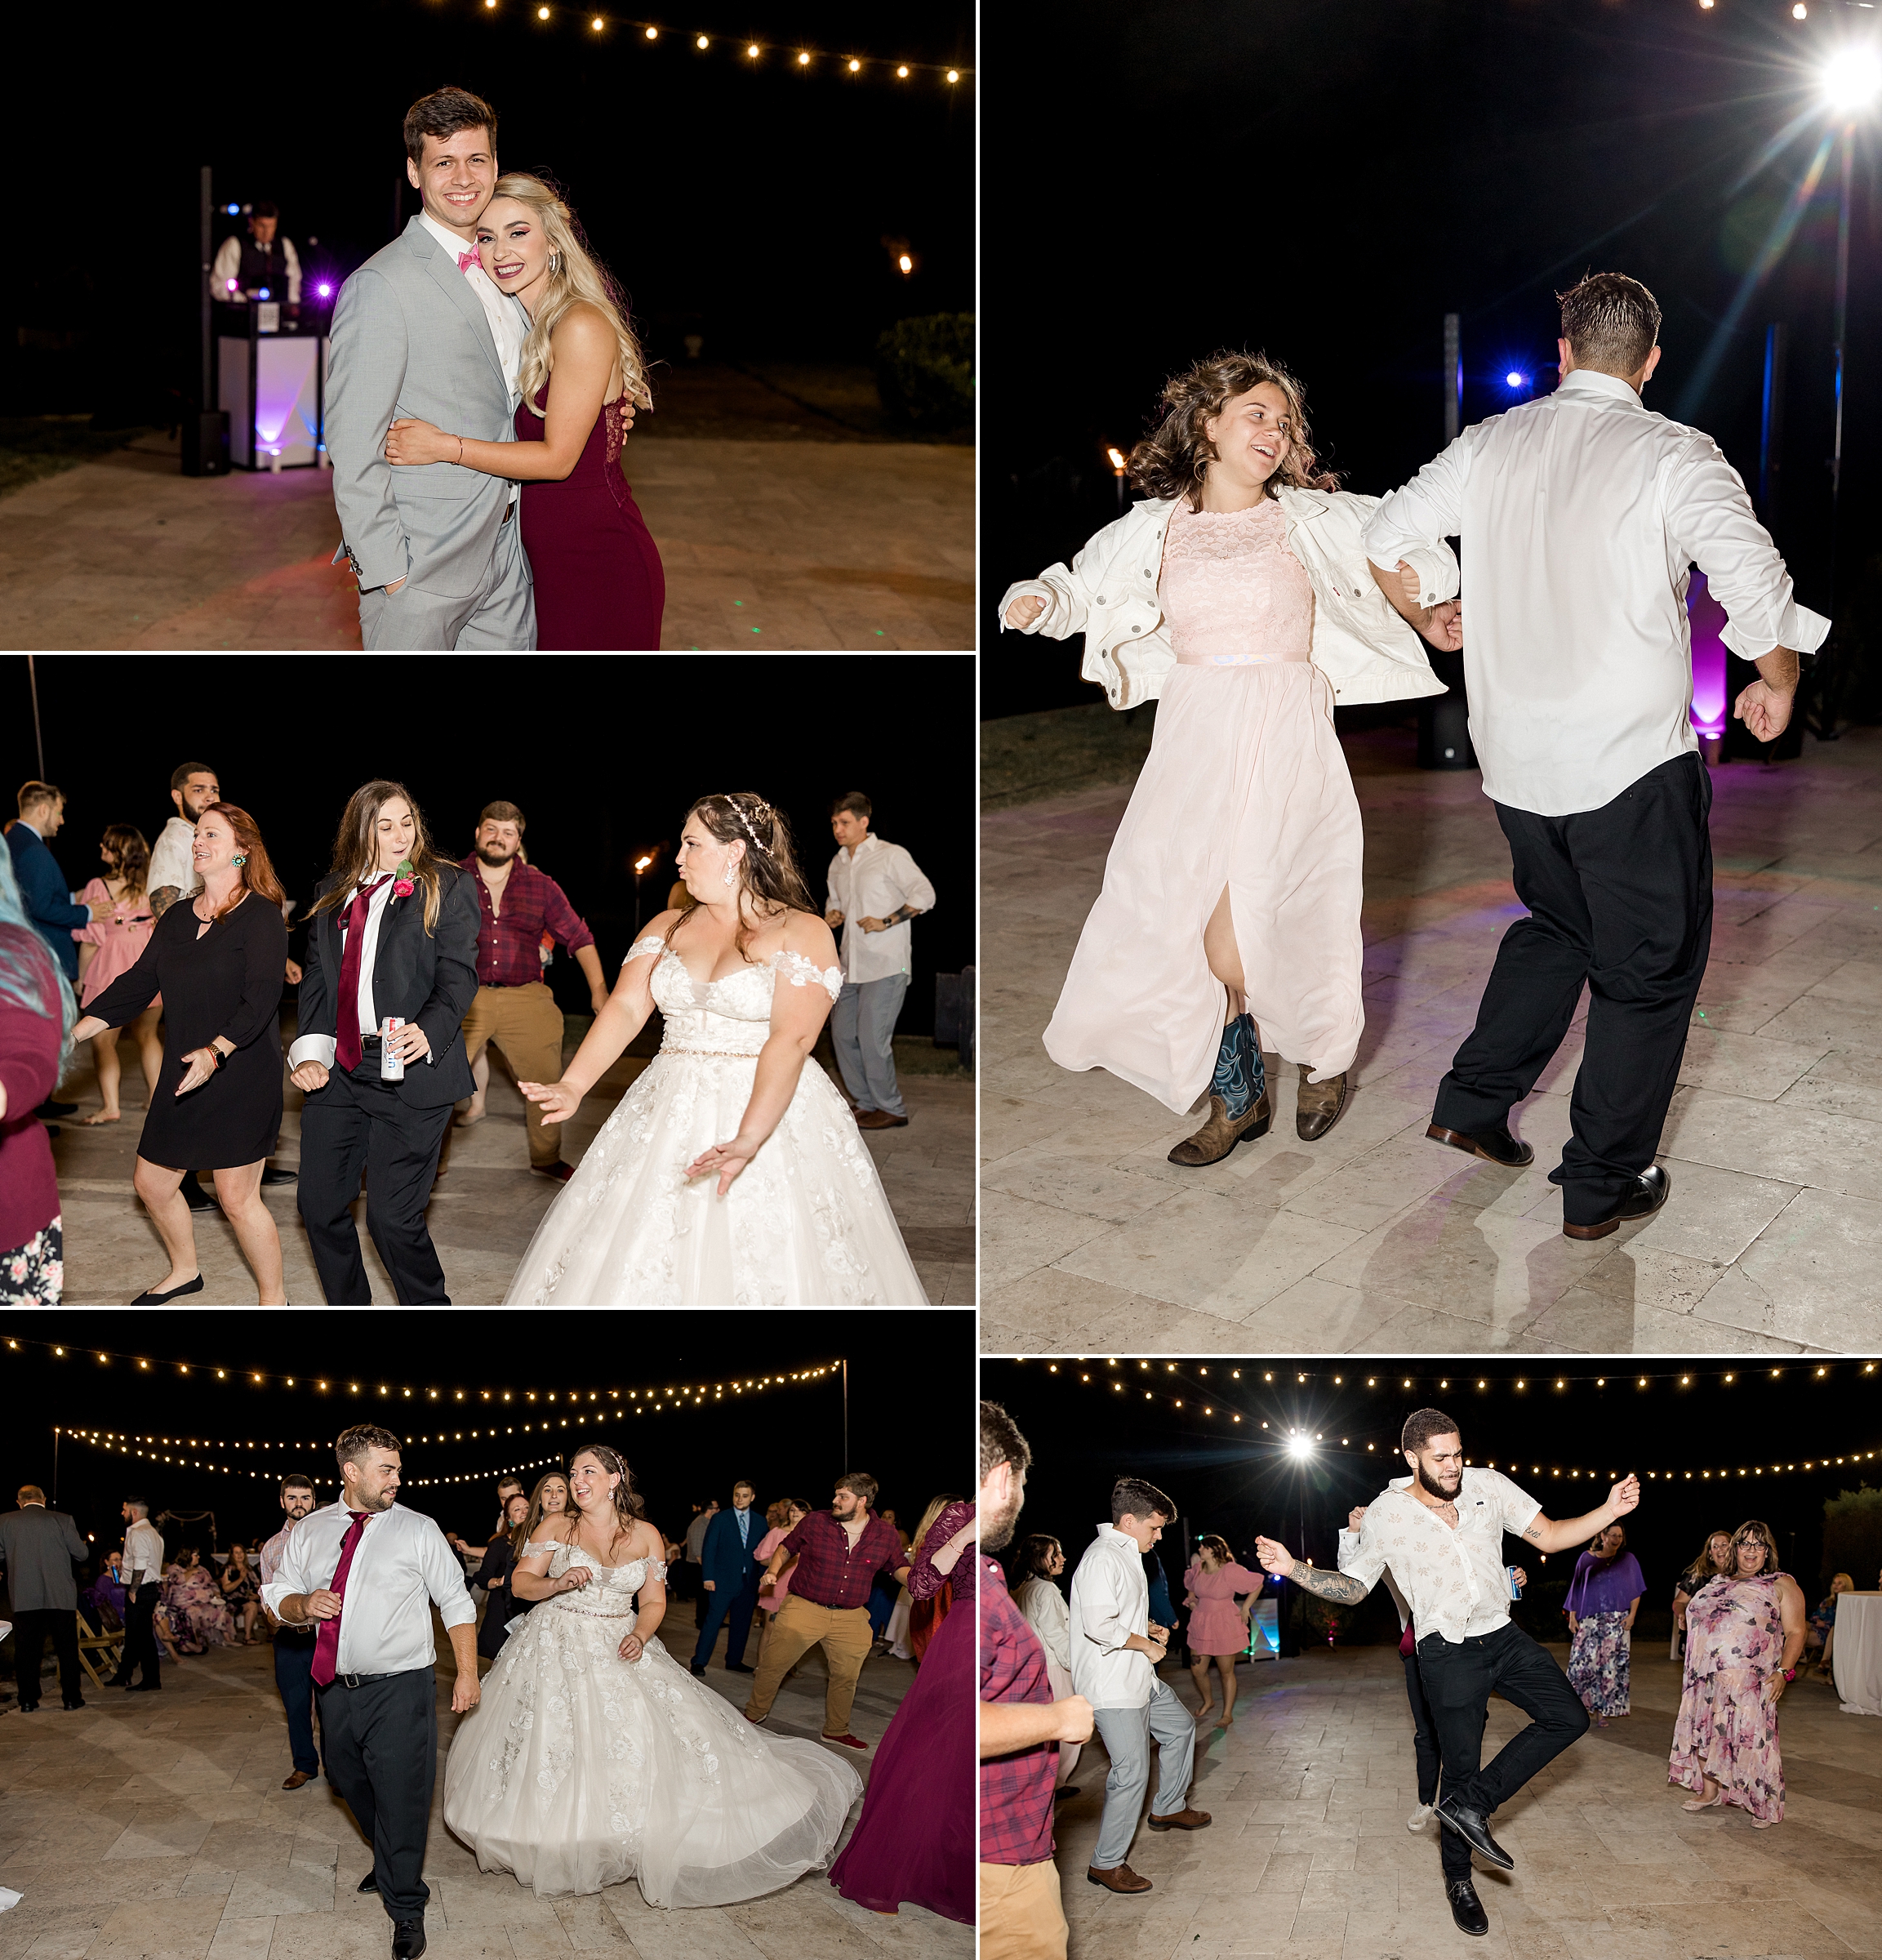 wedding guests celebrate newlyweds and dance into the night